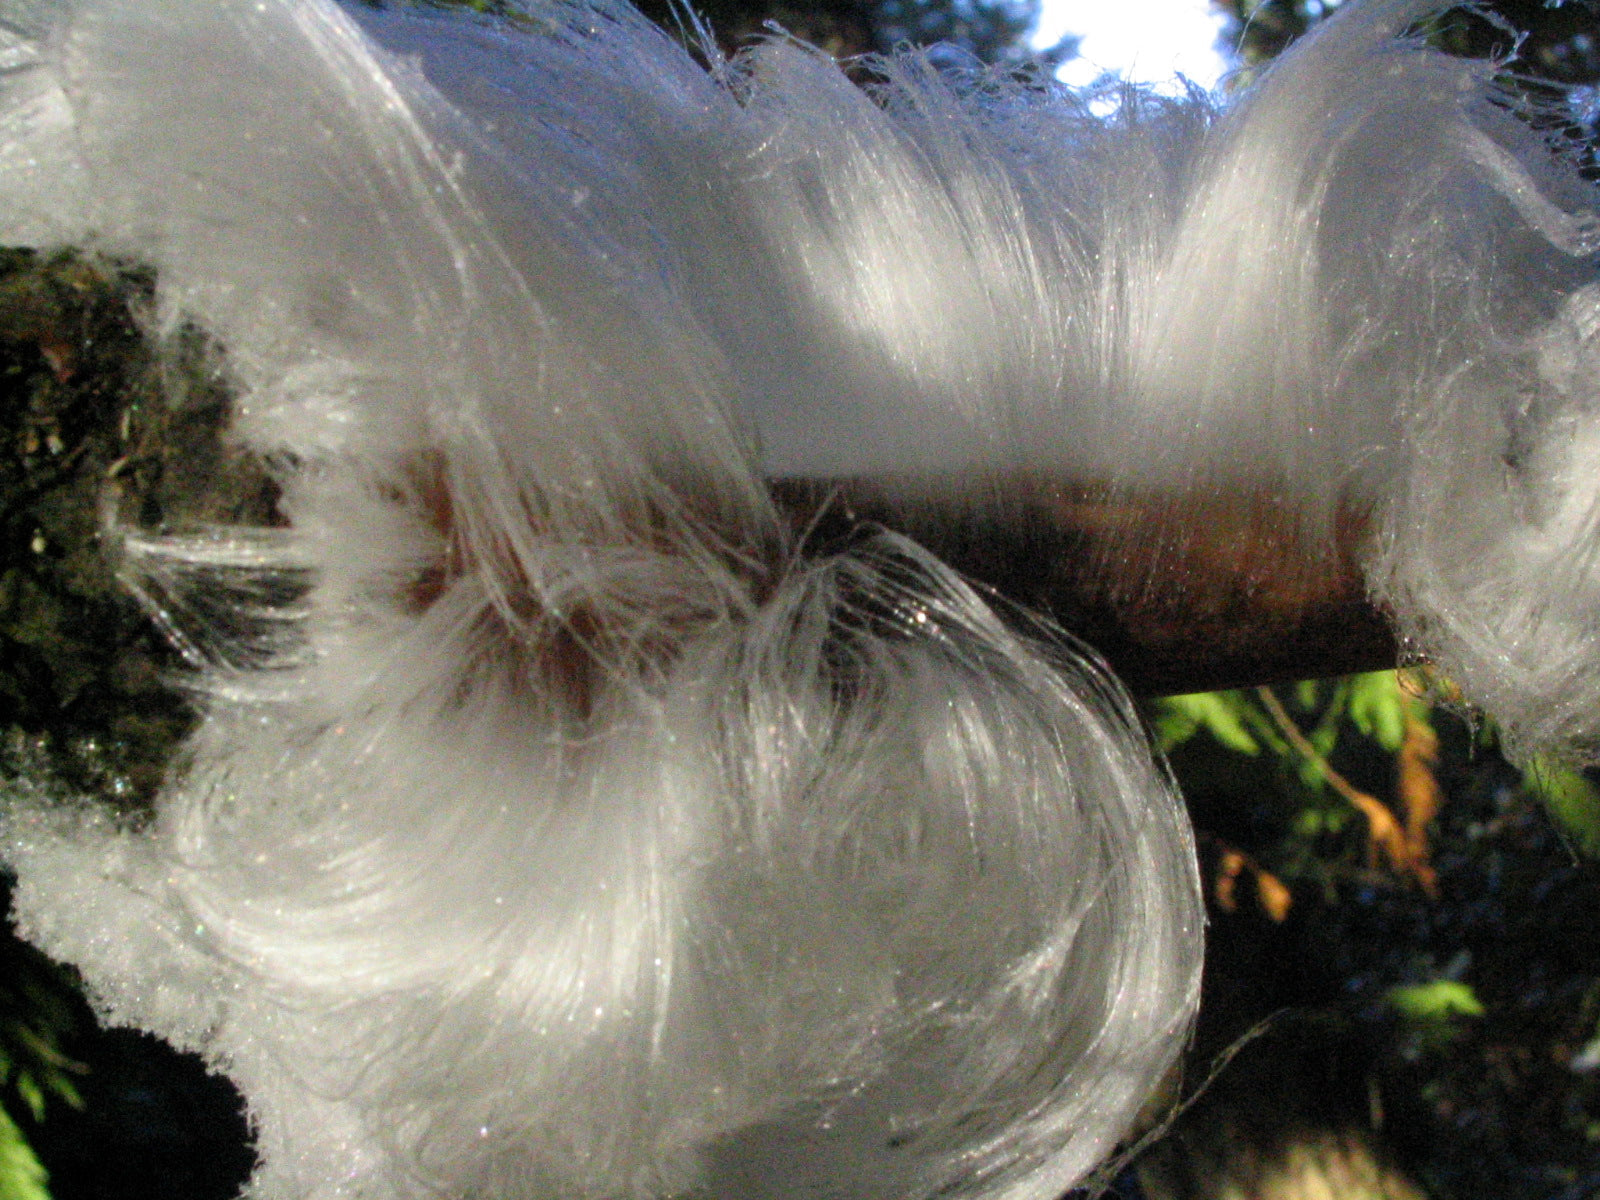 Hair Ice found on the hiking trails in Washington